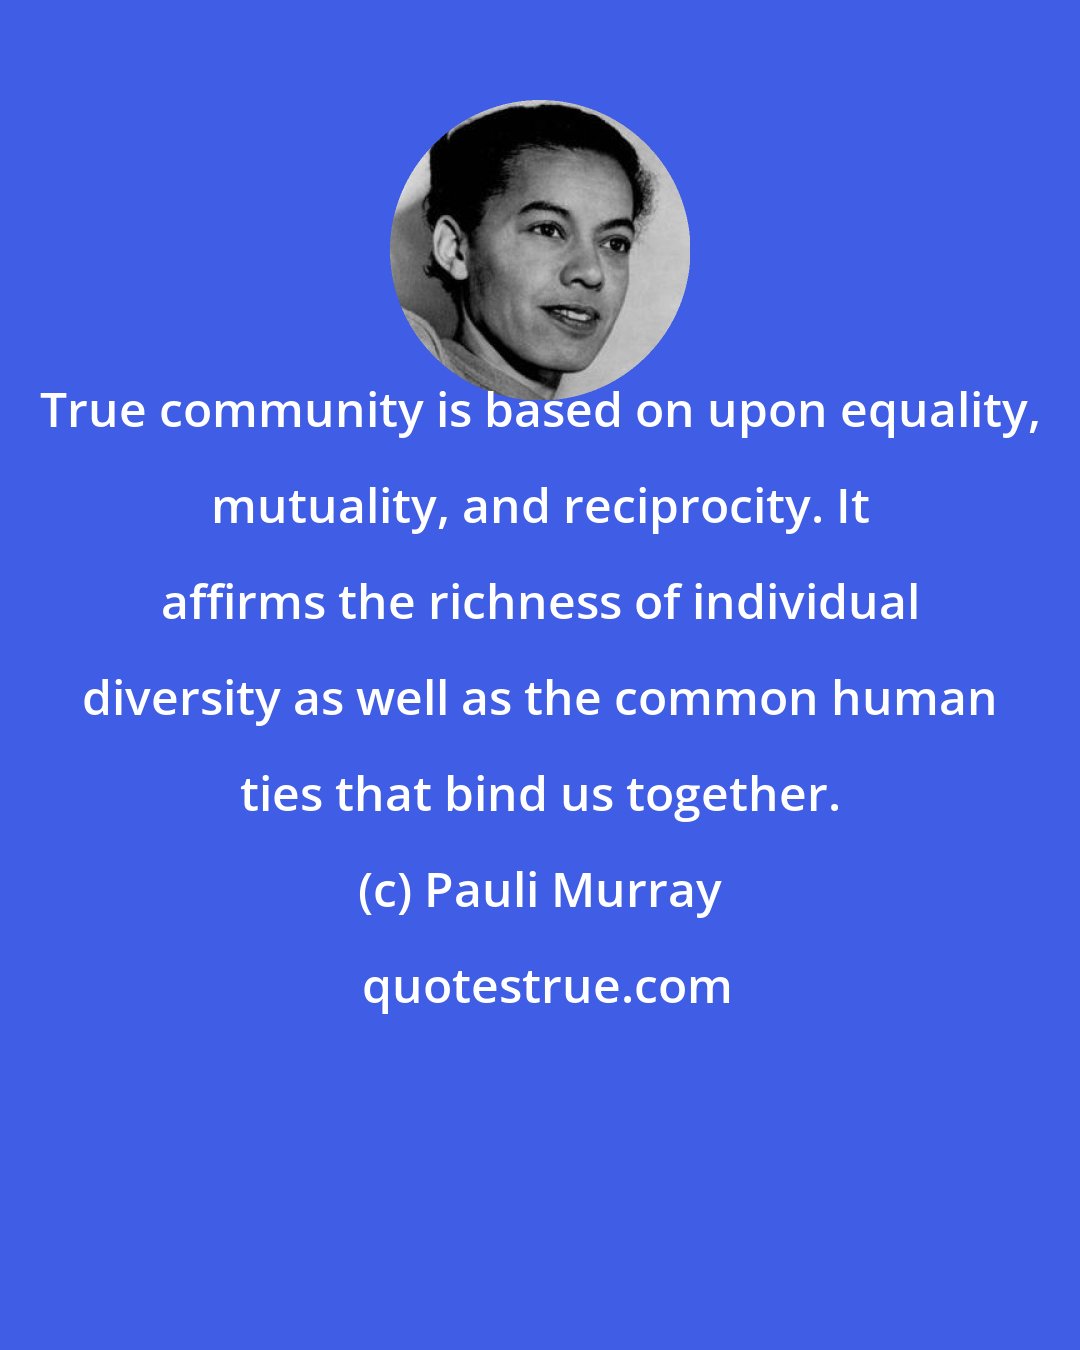 Pauli Murray: True community is based on upon equality, mutuality, and reciprocity. It affirms the richness of individual diversity as well as the common human ties that bind us together.